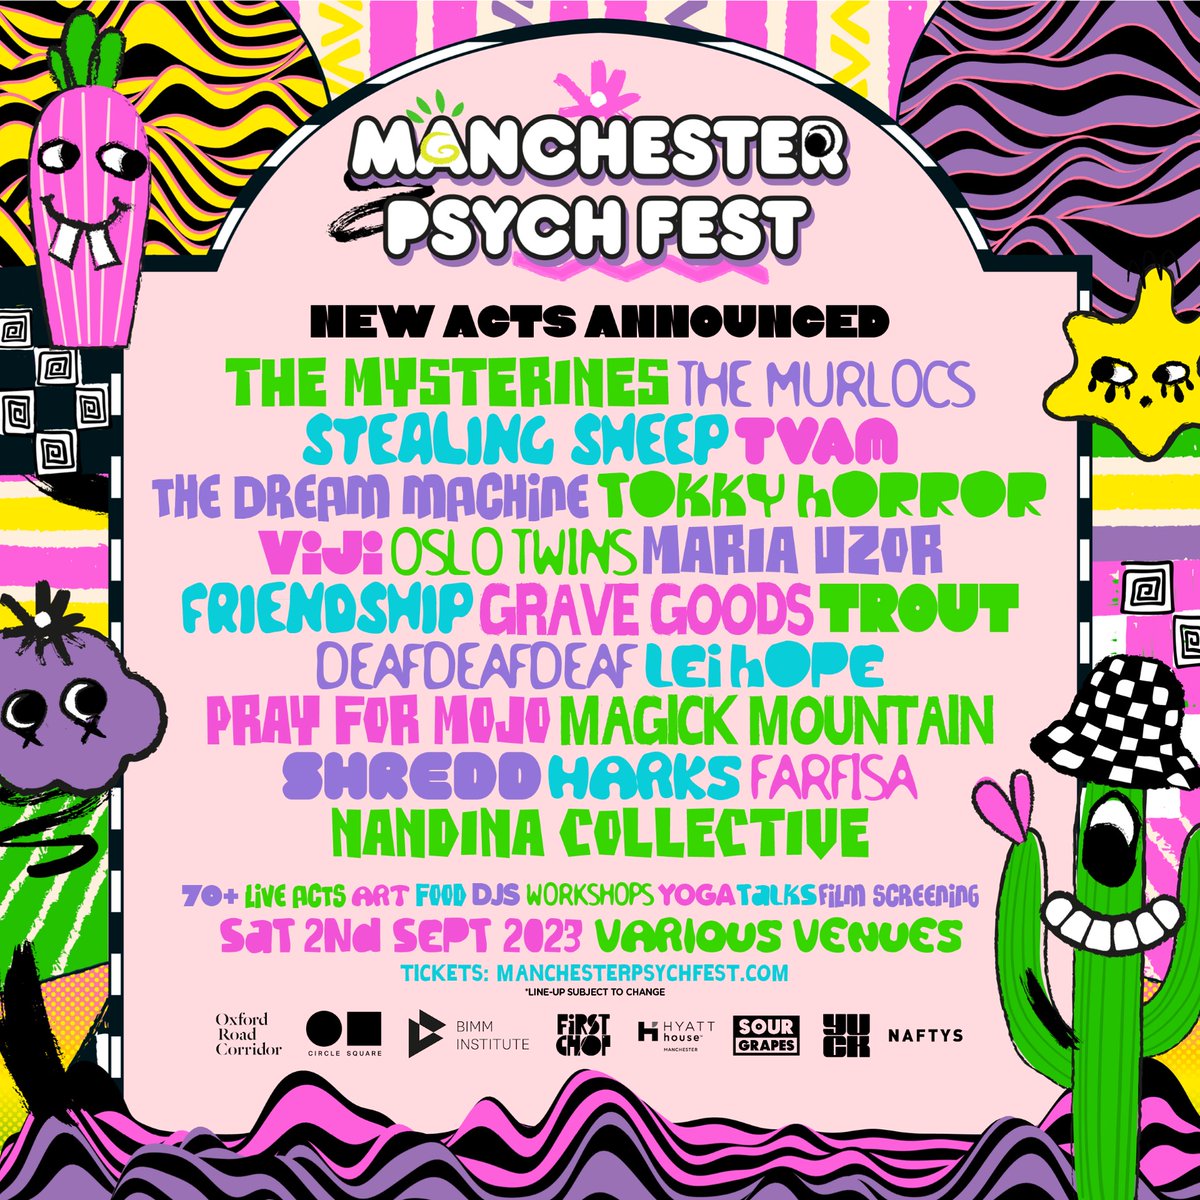 In case you missed it, @mancpsychfest have unveiled the final wave of acts for this years festival. @themurlocs @TheMysterines @stealingsheep @_tvam @DreamMachineHQ @tokkyhorror and more all join this years bill. Tickets: manchesterpsychfest.com